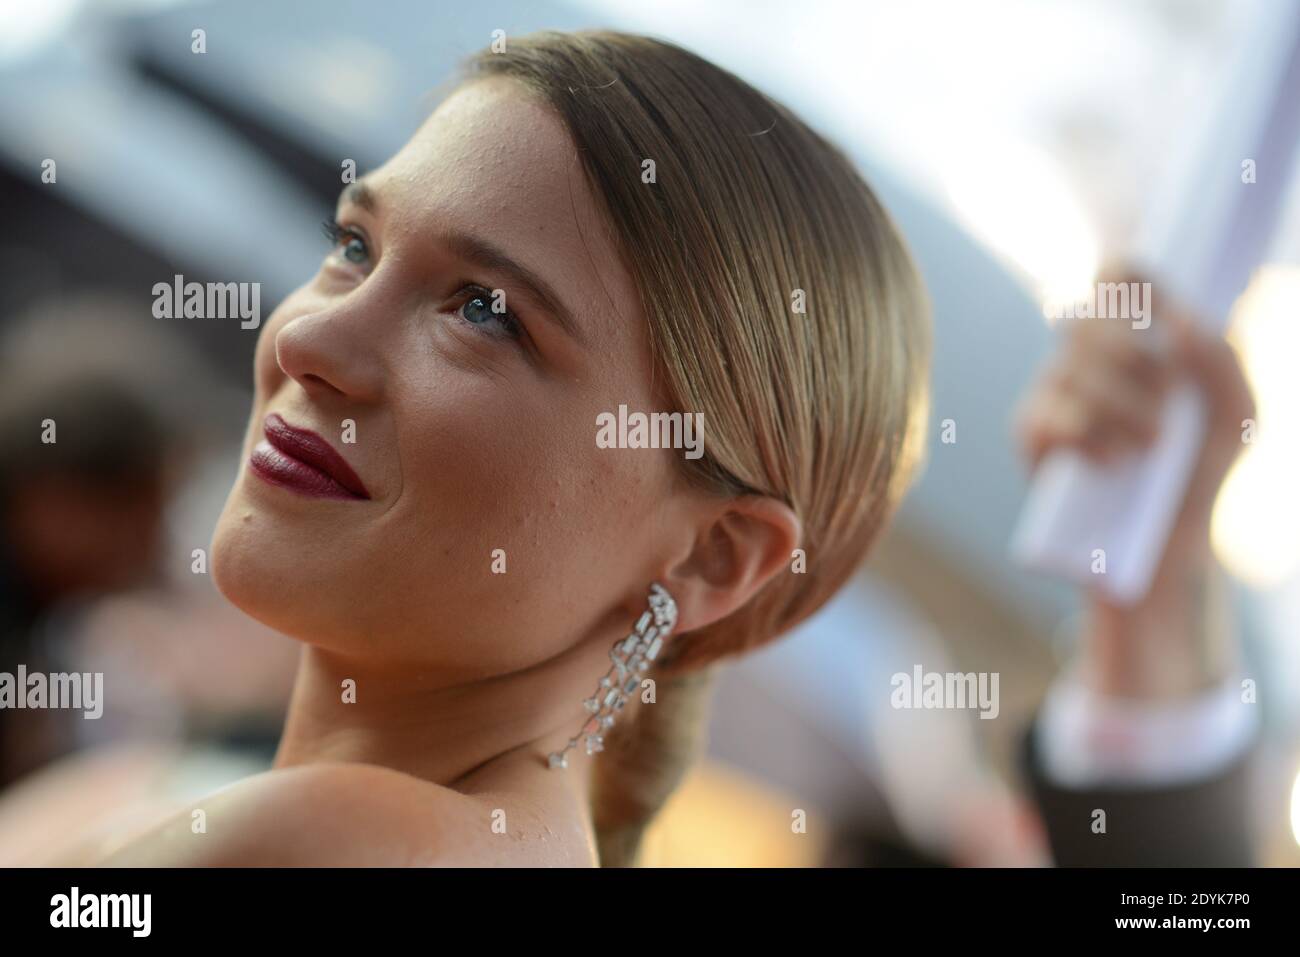 Lea Seydoux arriving at the 'Jimmy P. Psychotherapy Of A Plains Indian' screening and 'Grand Central screening held at the Palais Des Festivals as part of the Cannes Film Festival in Cannes, France on May 18, 2013. Photo by Lionel Hahn/ABACAPRESS.COM Stock Photo